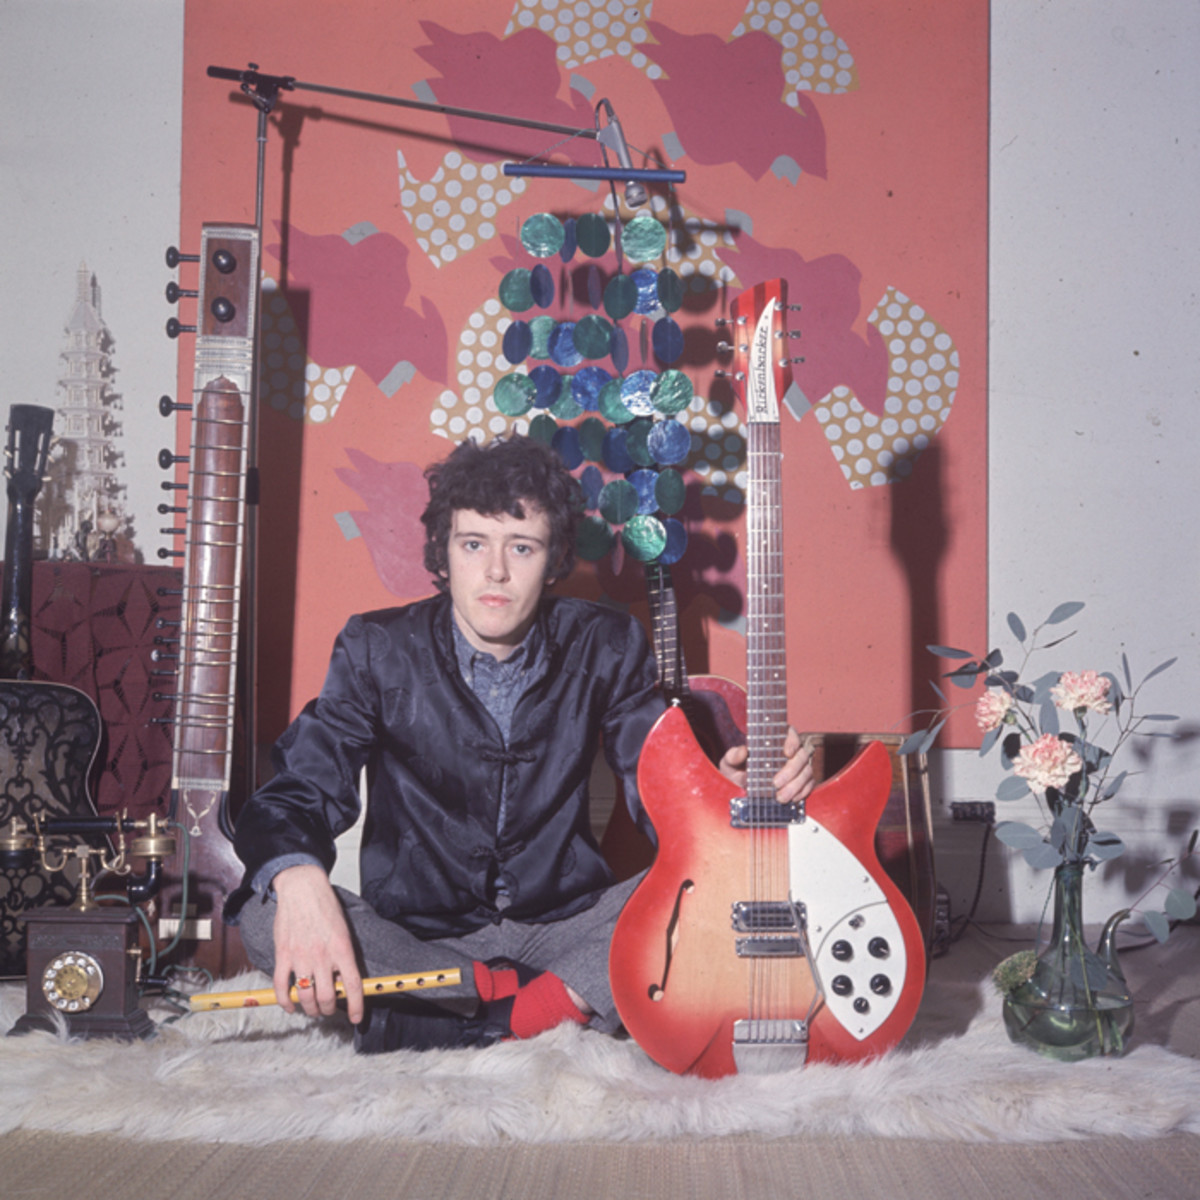  Donovan (Donovan Leitch) during the 1960s holding his Rickenbacker guitar and a flute, a sitar and other guitars in the background. (Photo by Keystone/Getty Images)